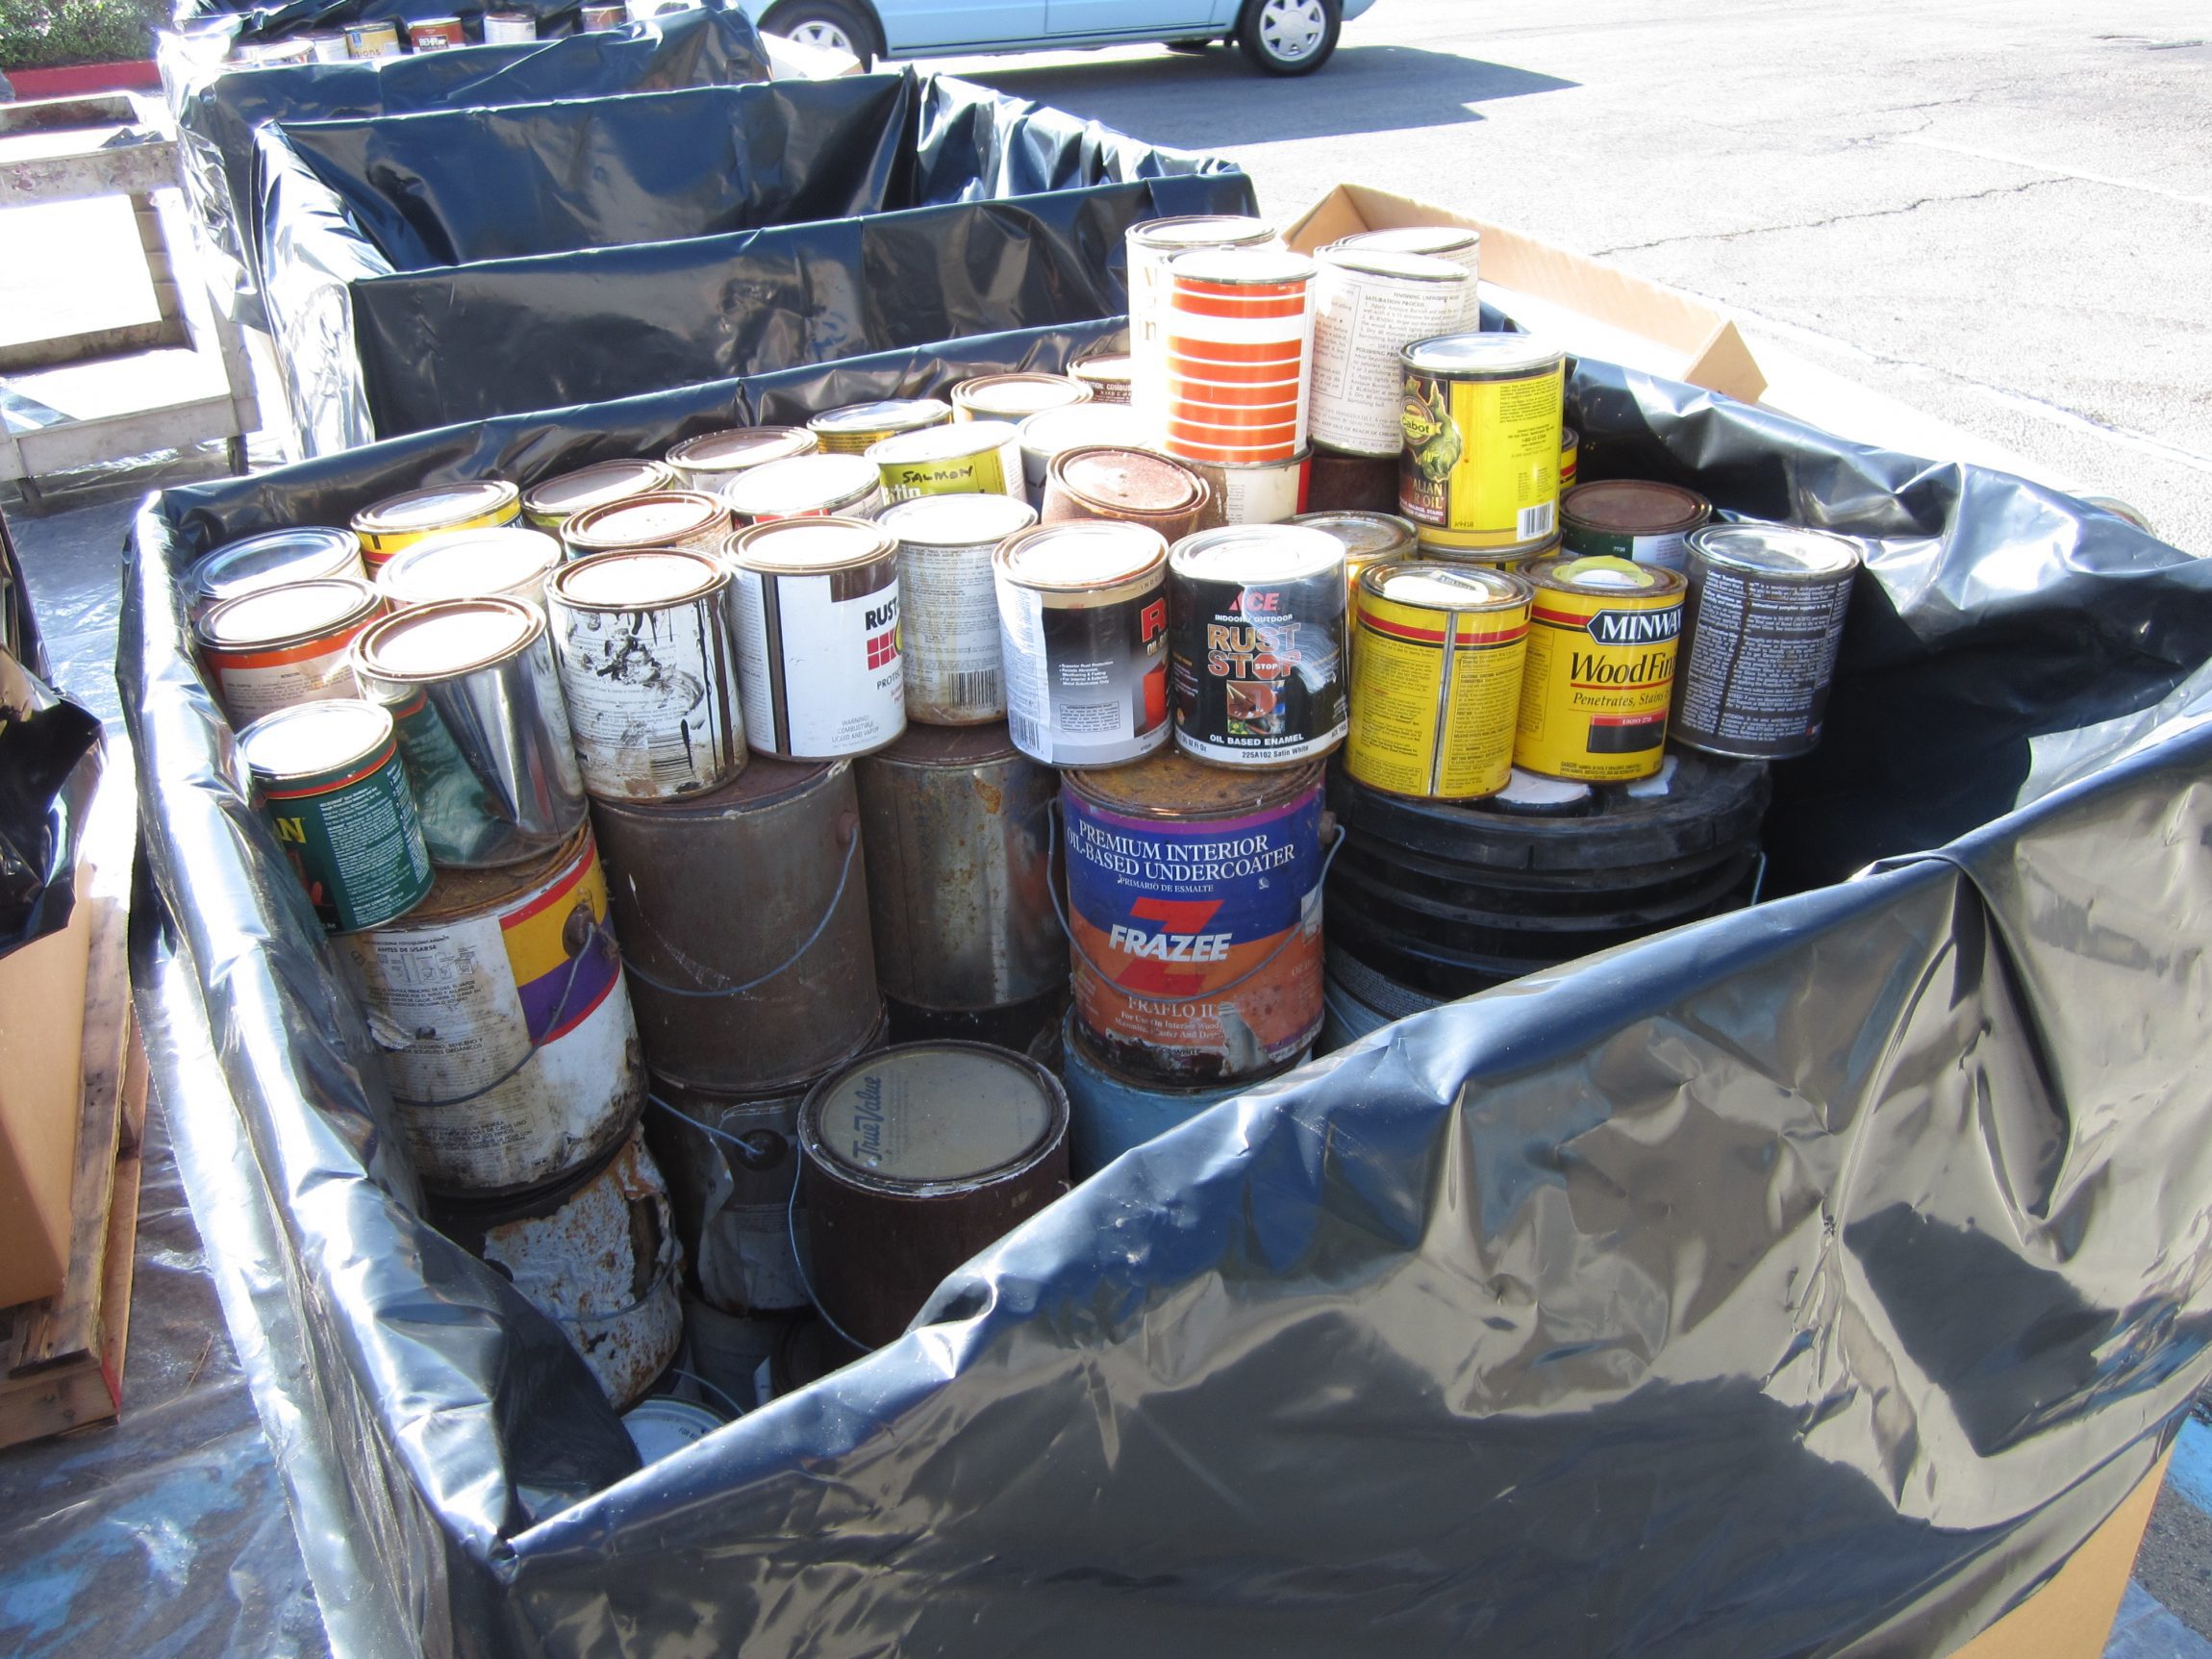 Common HHW items: paint, automotive fluids, fluorescent tubes, cleaning products, batteries and gardening chemicals.